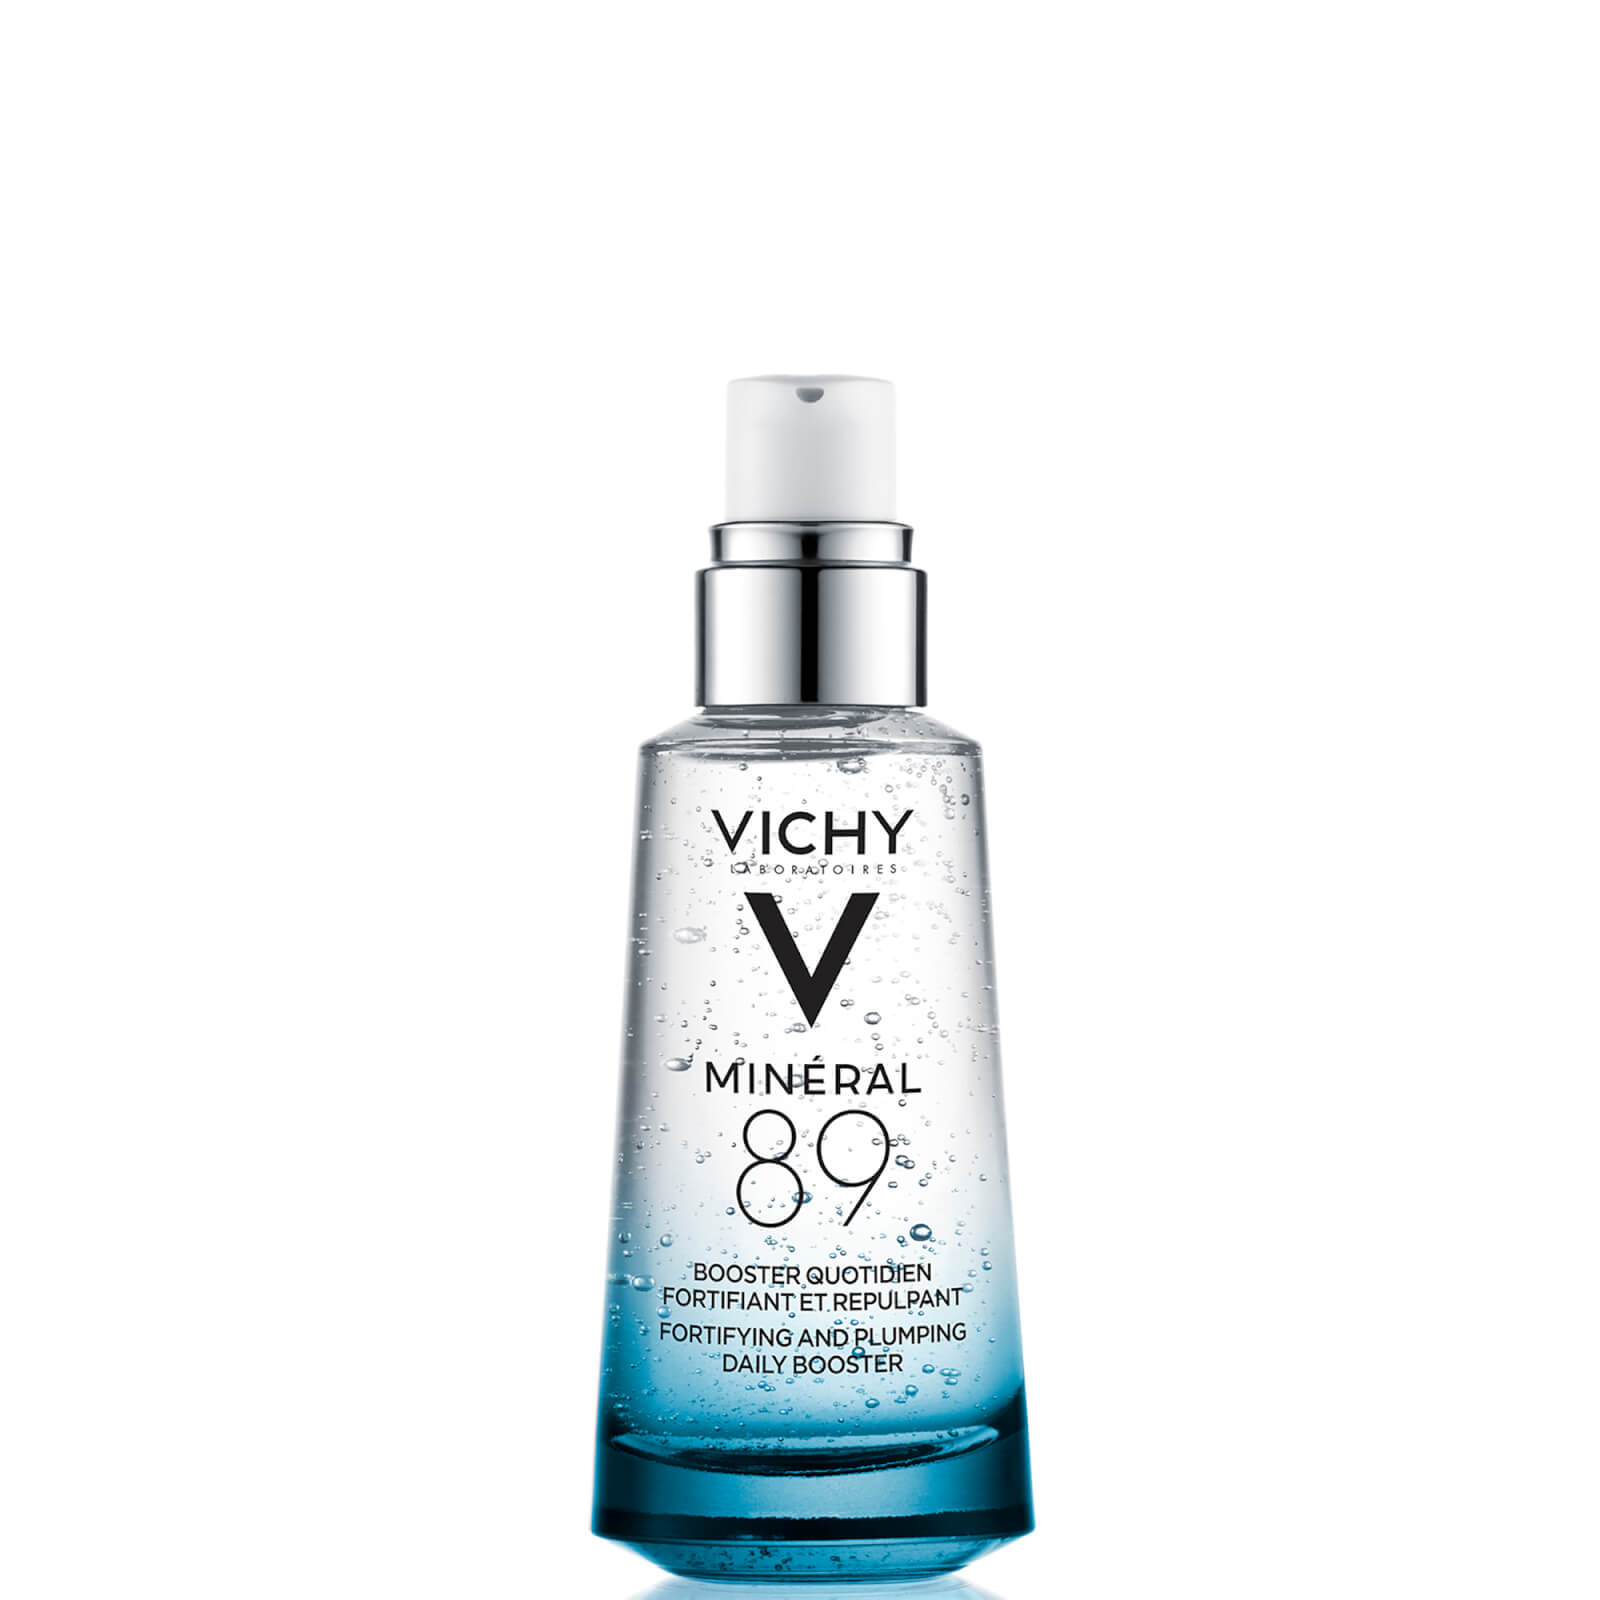 VICHY Mineral 89 Hyaluronic Acid Hydrating Serum - Hypoallergenic, for All Skin Types 75ml